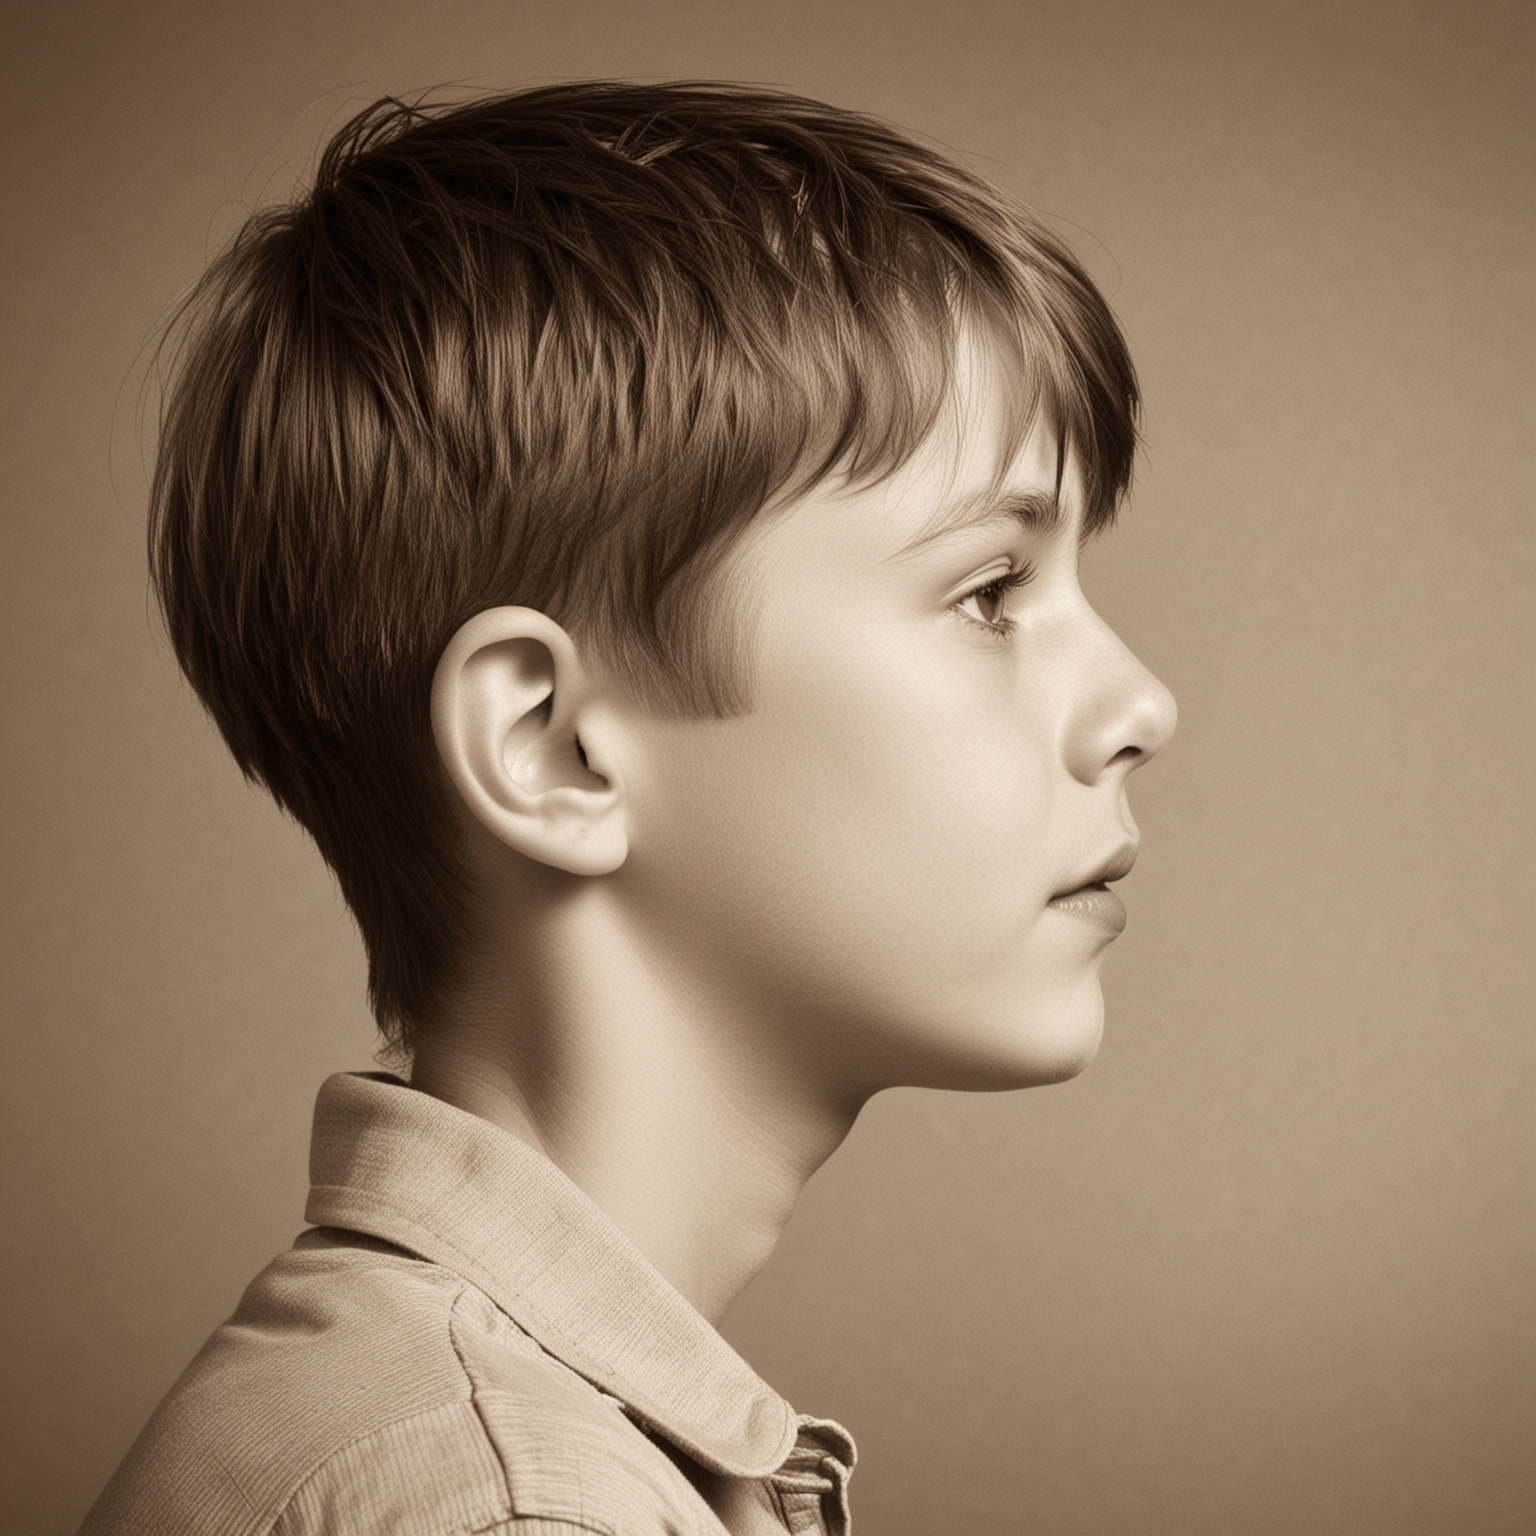 Sepia Portrait of a Young Boy